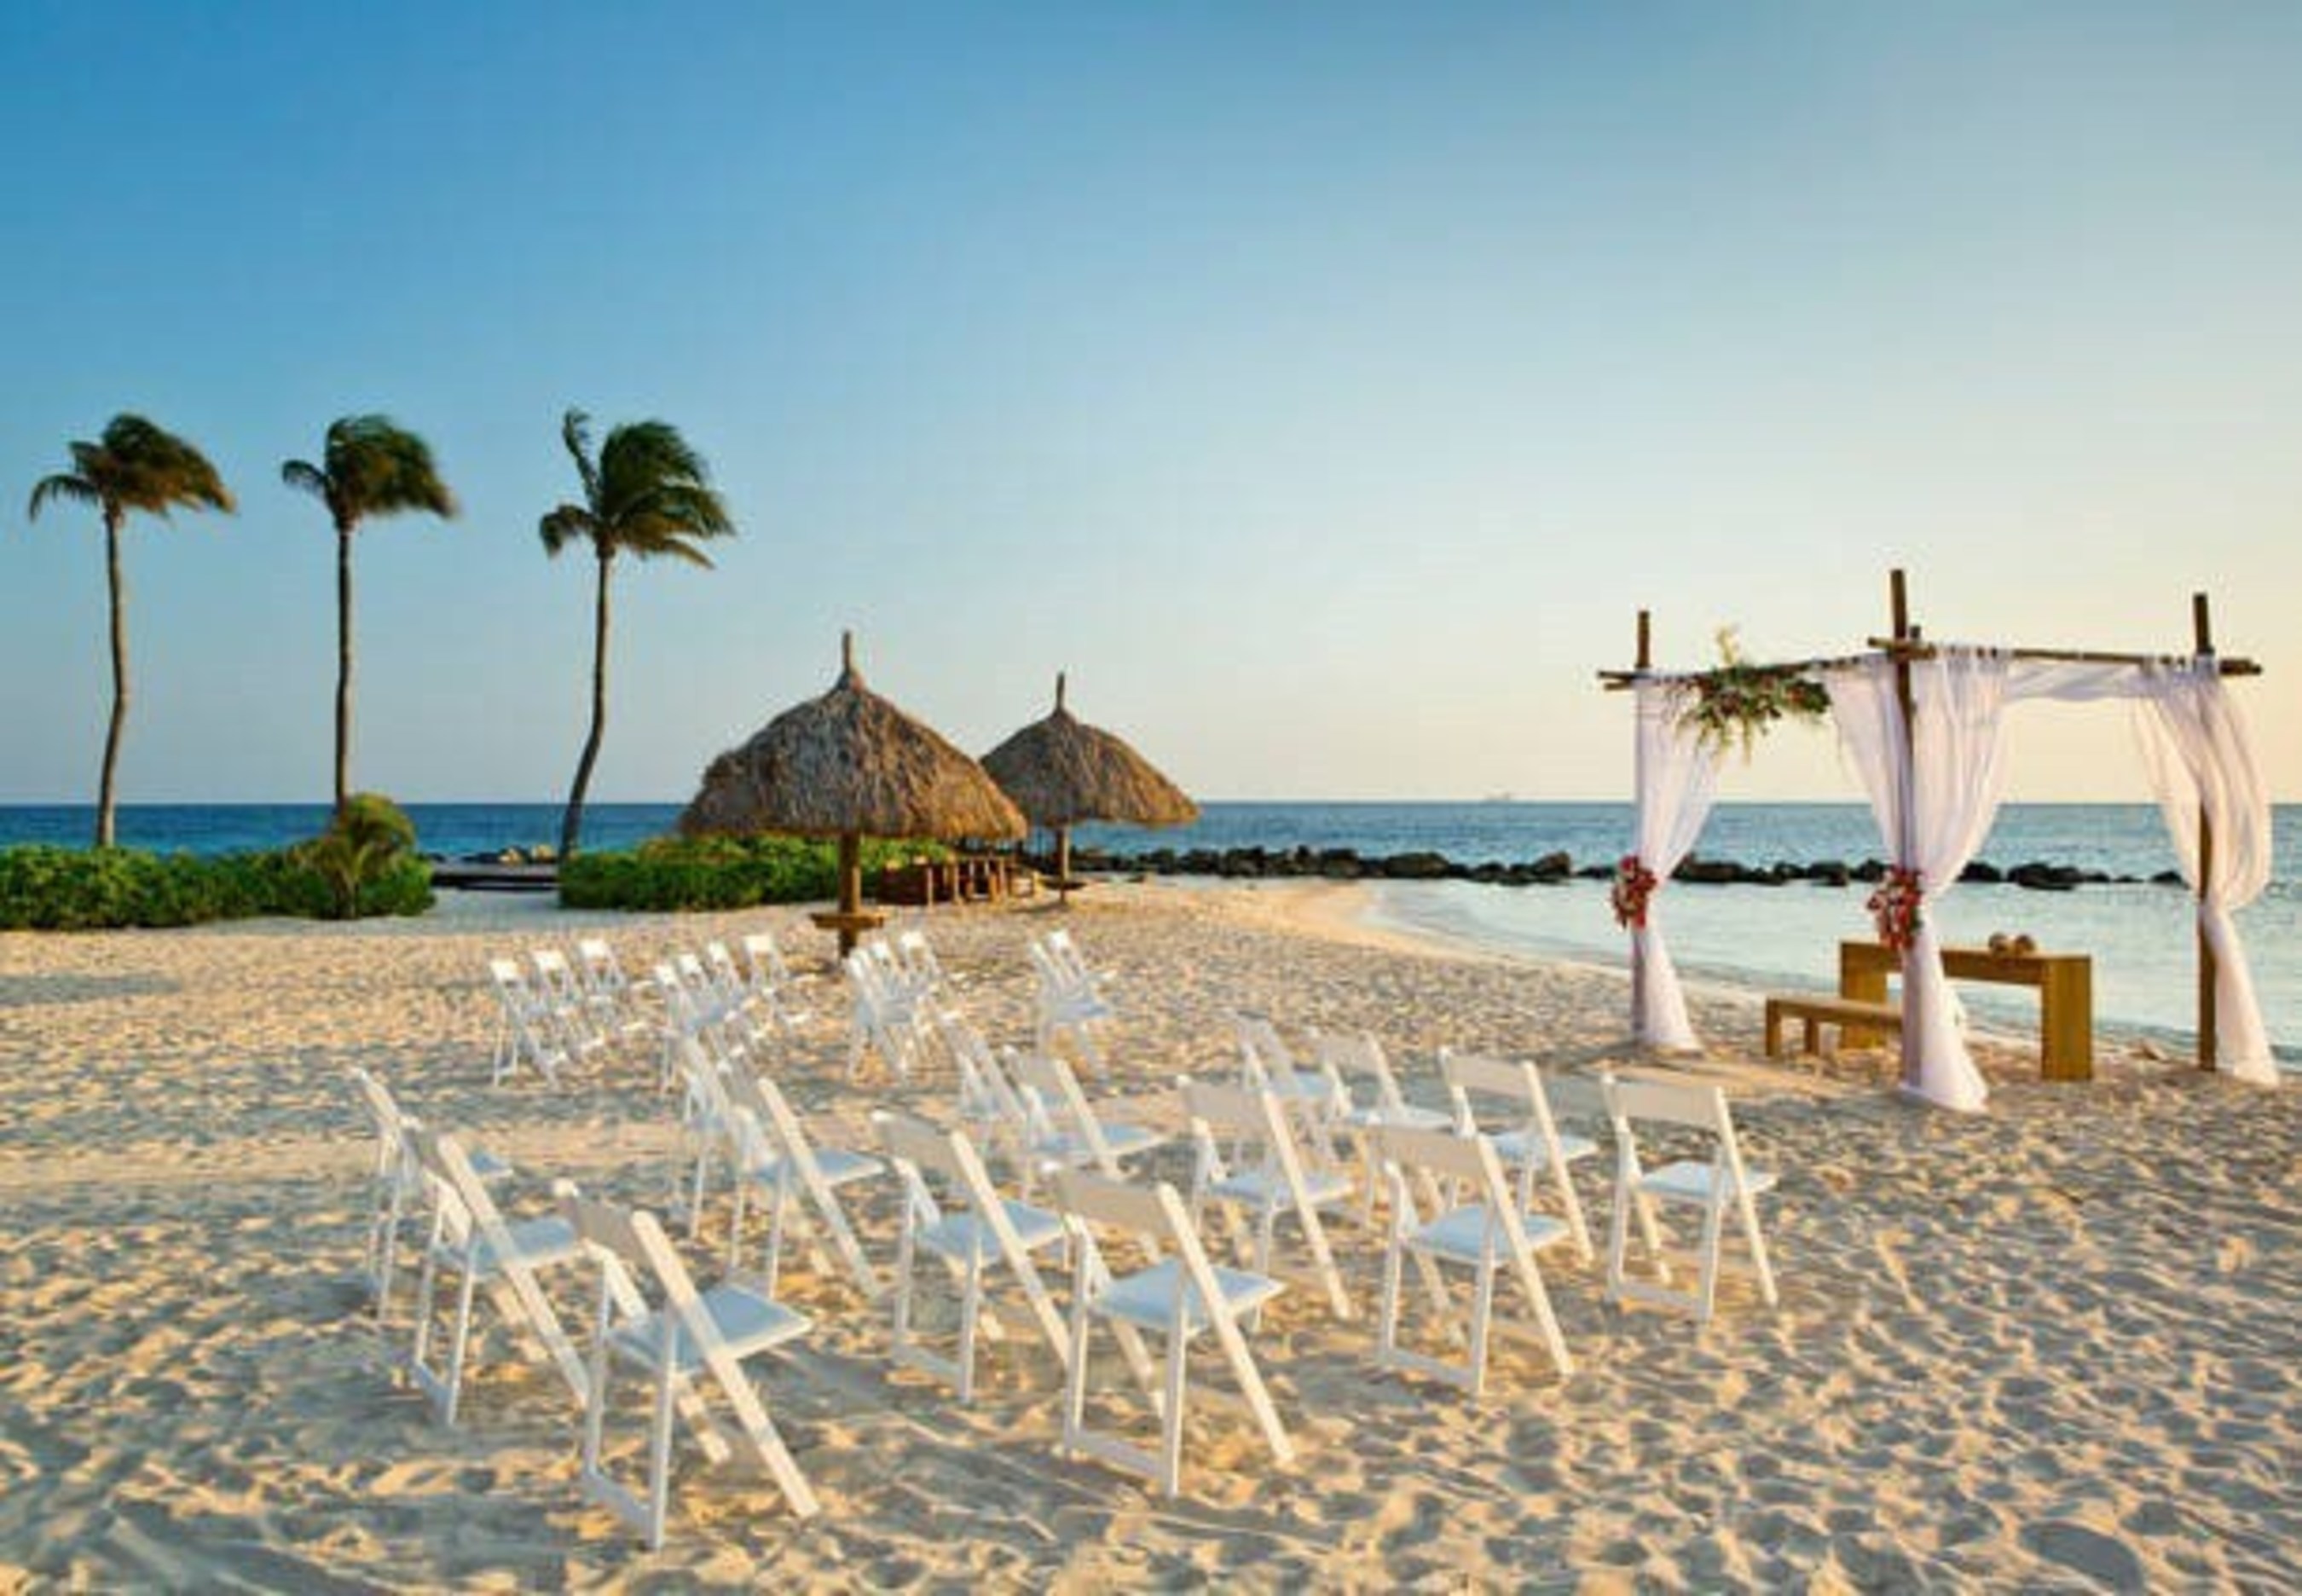 Offering year-round sunshine, deluxe accommodations and a convenient location, the Curacao Marriott Beach Resort is a unique destination for diverse, ethnic, military and LGBT wedding ceremonies. For information, visit www.CuracaoMarriott.com or call 599-9-736-8800.